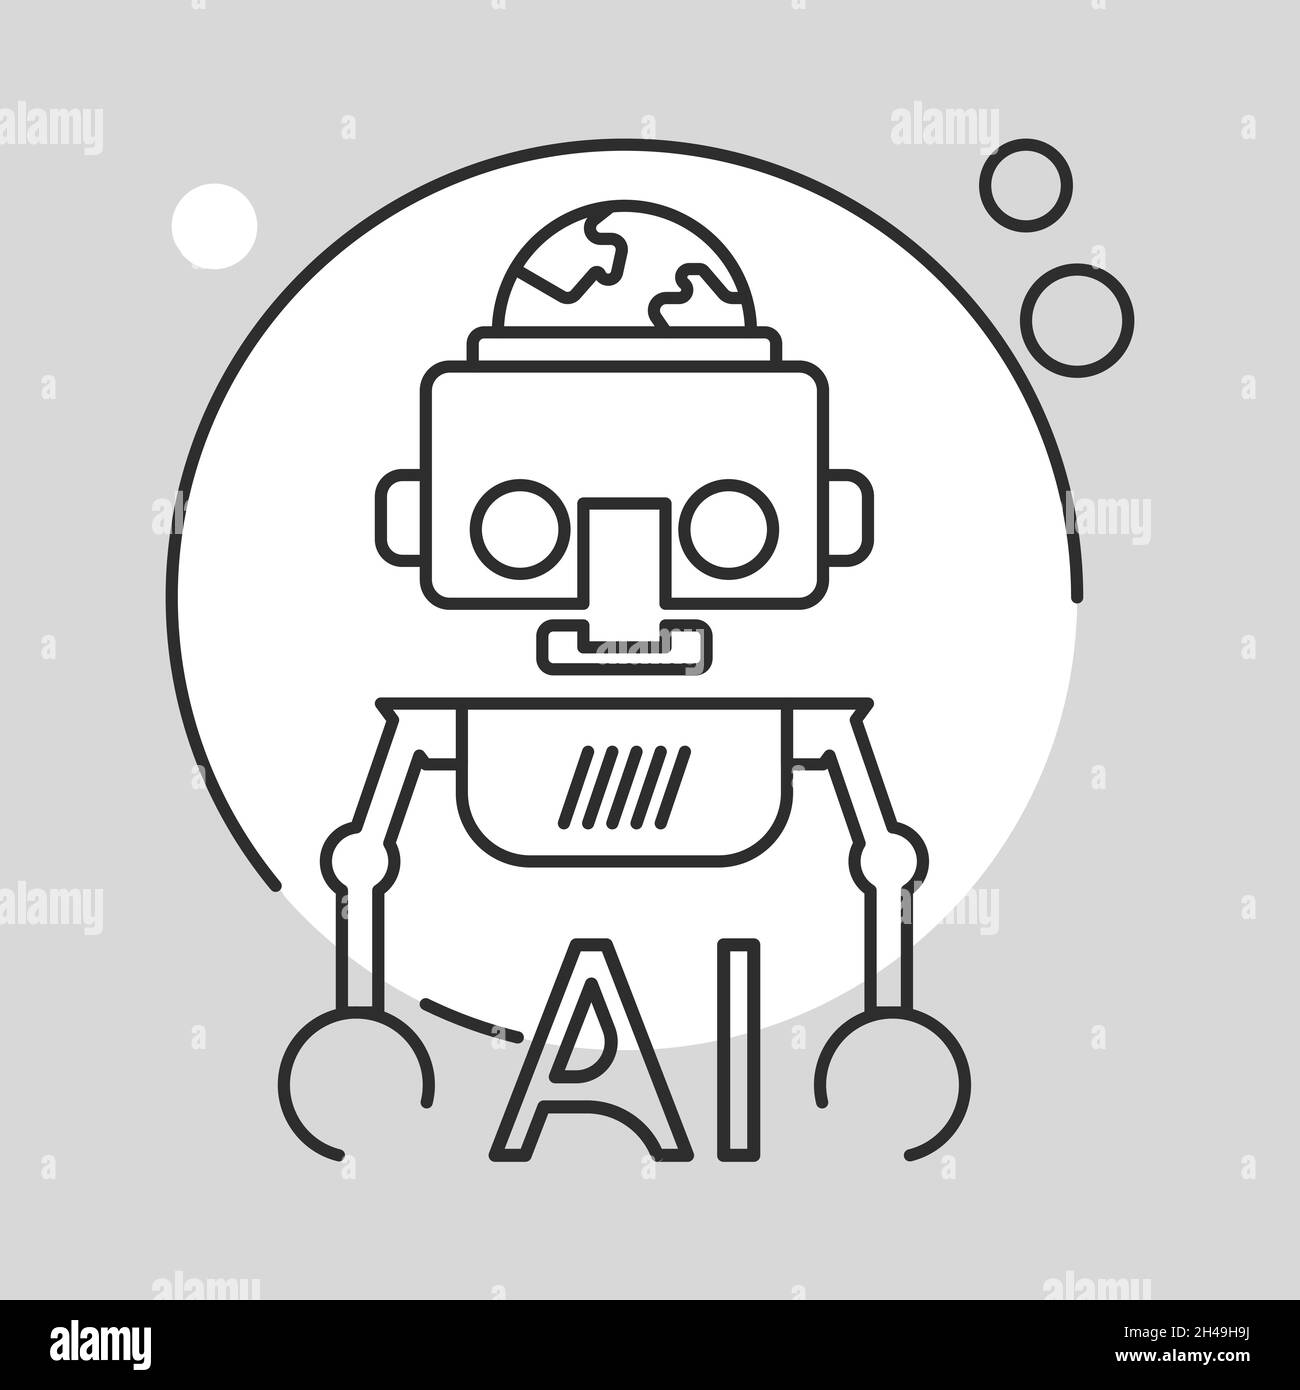 Robot icon. Artificial Intelligence singularity concept. Flat style illustration. Stock Vector